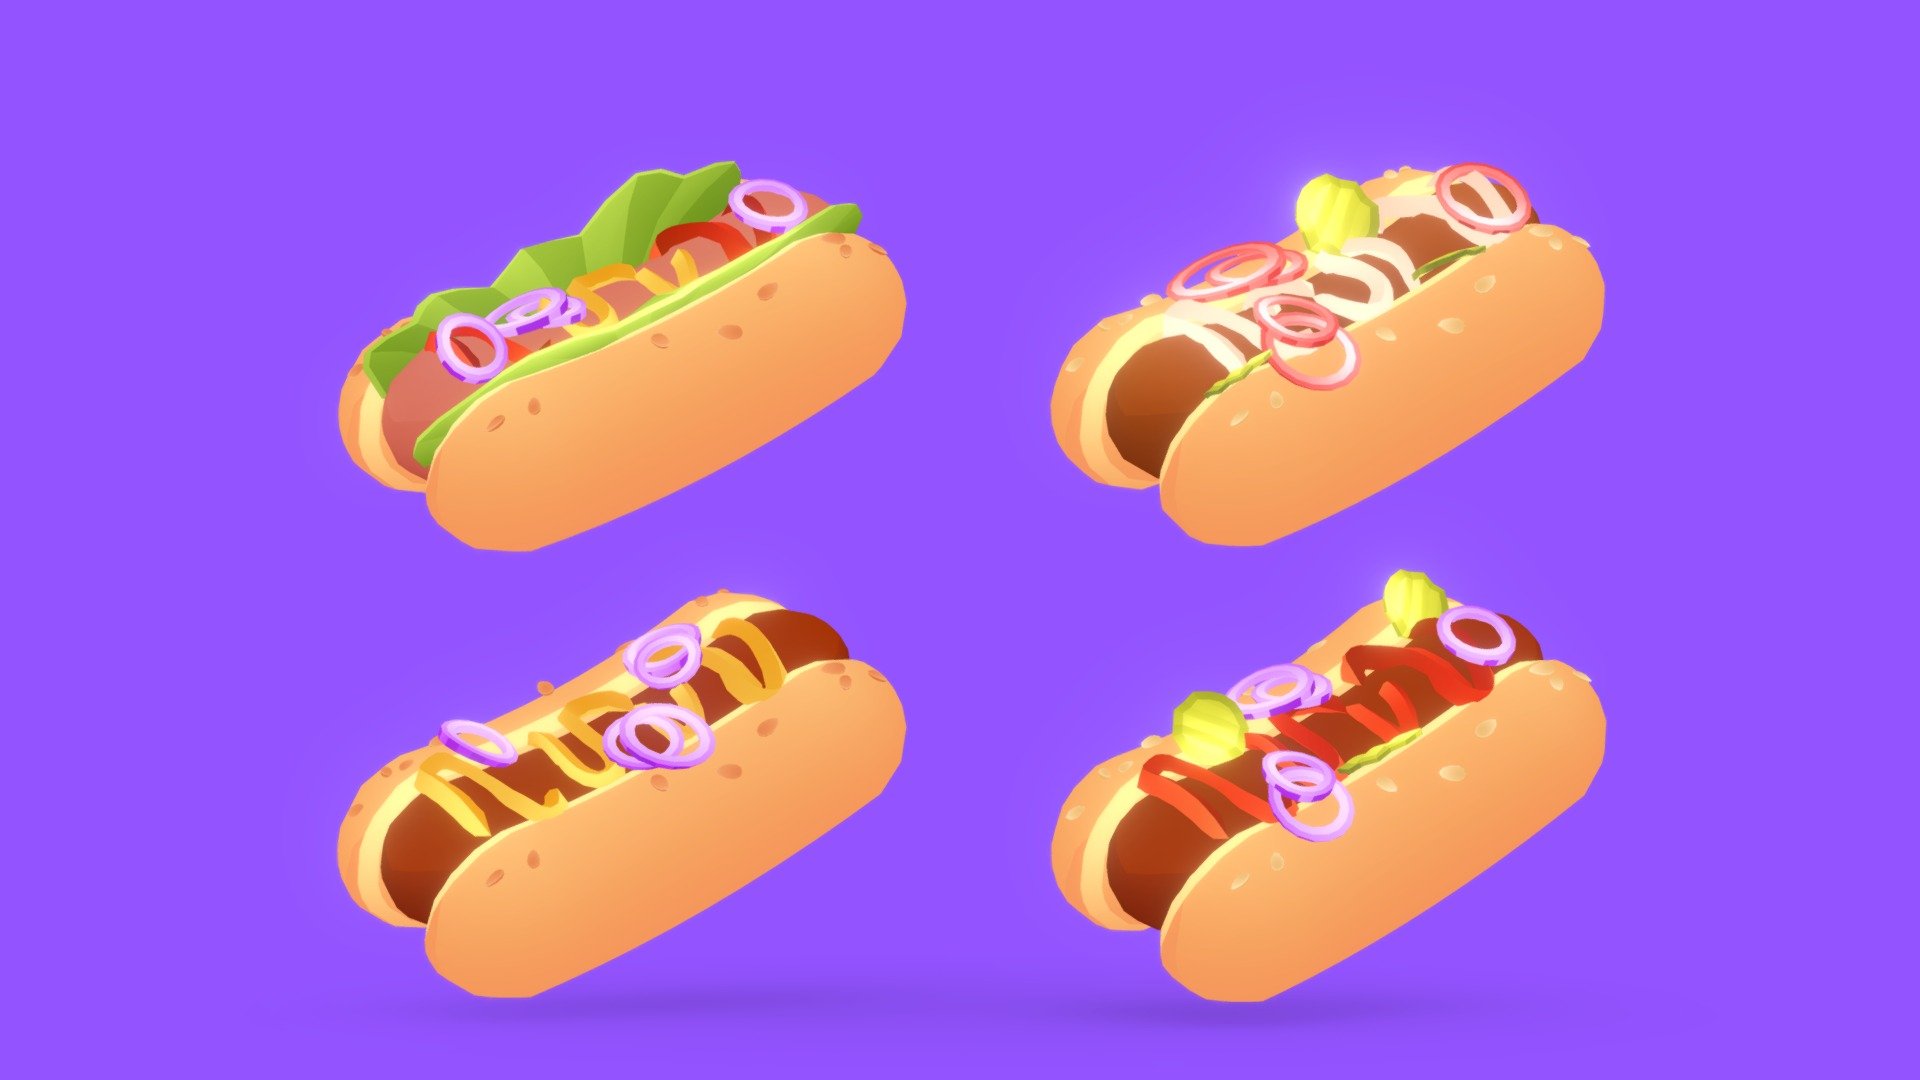 Low poly cute unlit hotdogs  pack.

Textured with gradient atlas, so it is performant for mobile games and video games.

Like a few of my other assets
in the same style, it uses a single texture diffuse map and is mapped using only color gradients. 
All gradient textures can be extended and combined to a large atlas.

There are more assets in this style to add to your game scene or environment. Check out my sale.

If you want to change the colors of the assets, you just need to move the UVs on the atlas to a different gradient.
Or contact me for changes, for a small fee.

I also accept freelance jobs. Do not hesitate to write me. 

Note: The assets provided cannot be shared or resold on any asset marketplace.*-------------Terms of Use--------------

Commercial use of the assets  provided is permitted but cannot be included in an asset pack or sold at any sort of asset/resource marketplace.* - Hot Dogs - Buy Royalty Free 3D model by Stylized Box (@Stylized_Box) 3d model